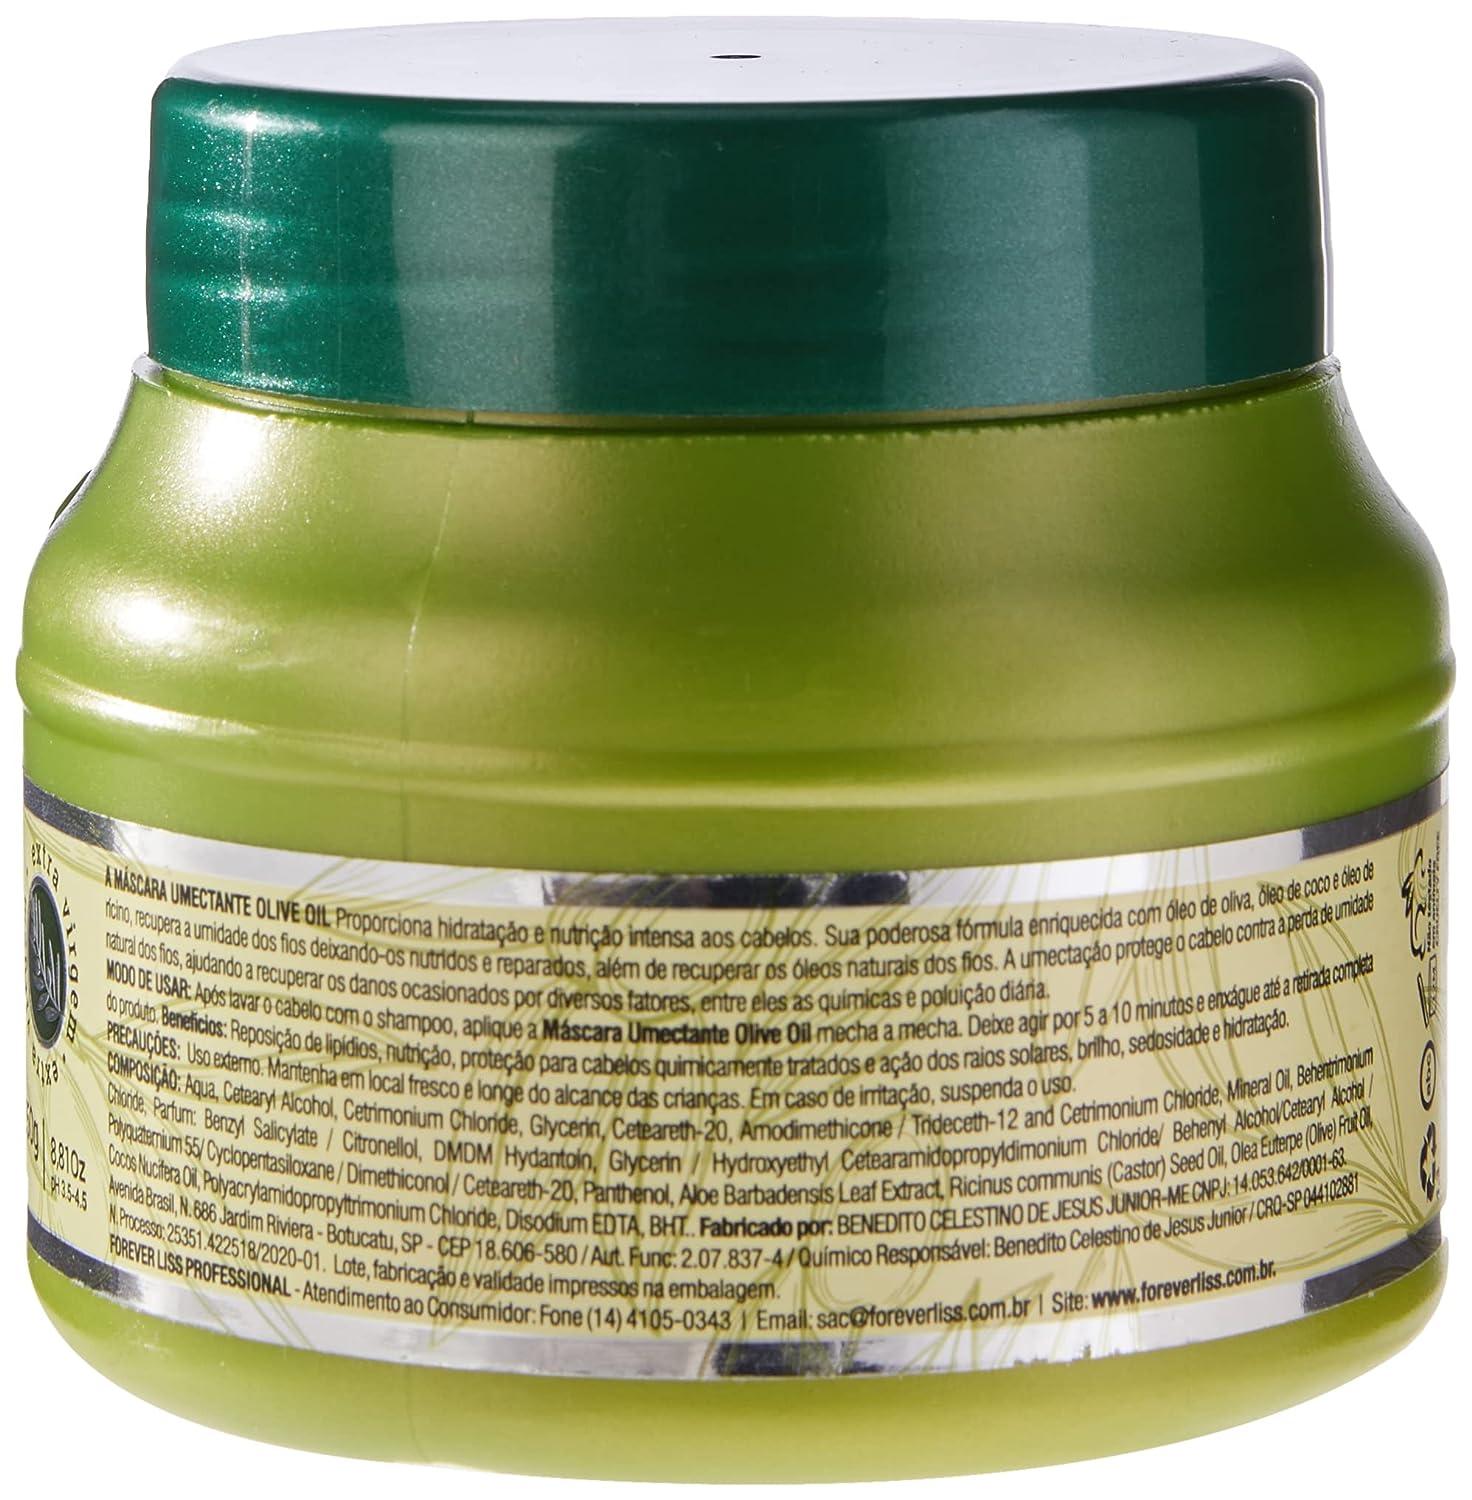 250g Hair Growth Mask Forever Liss